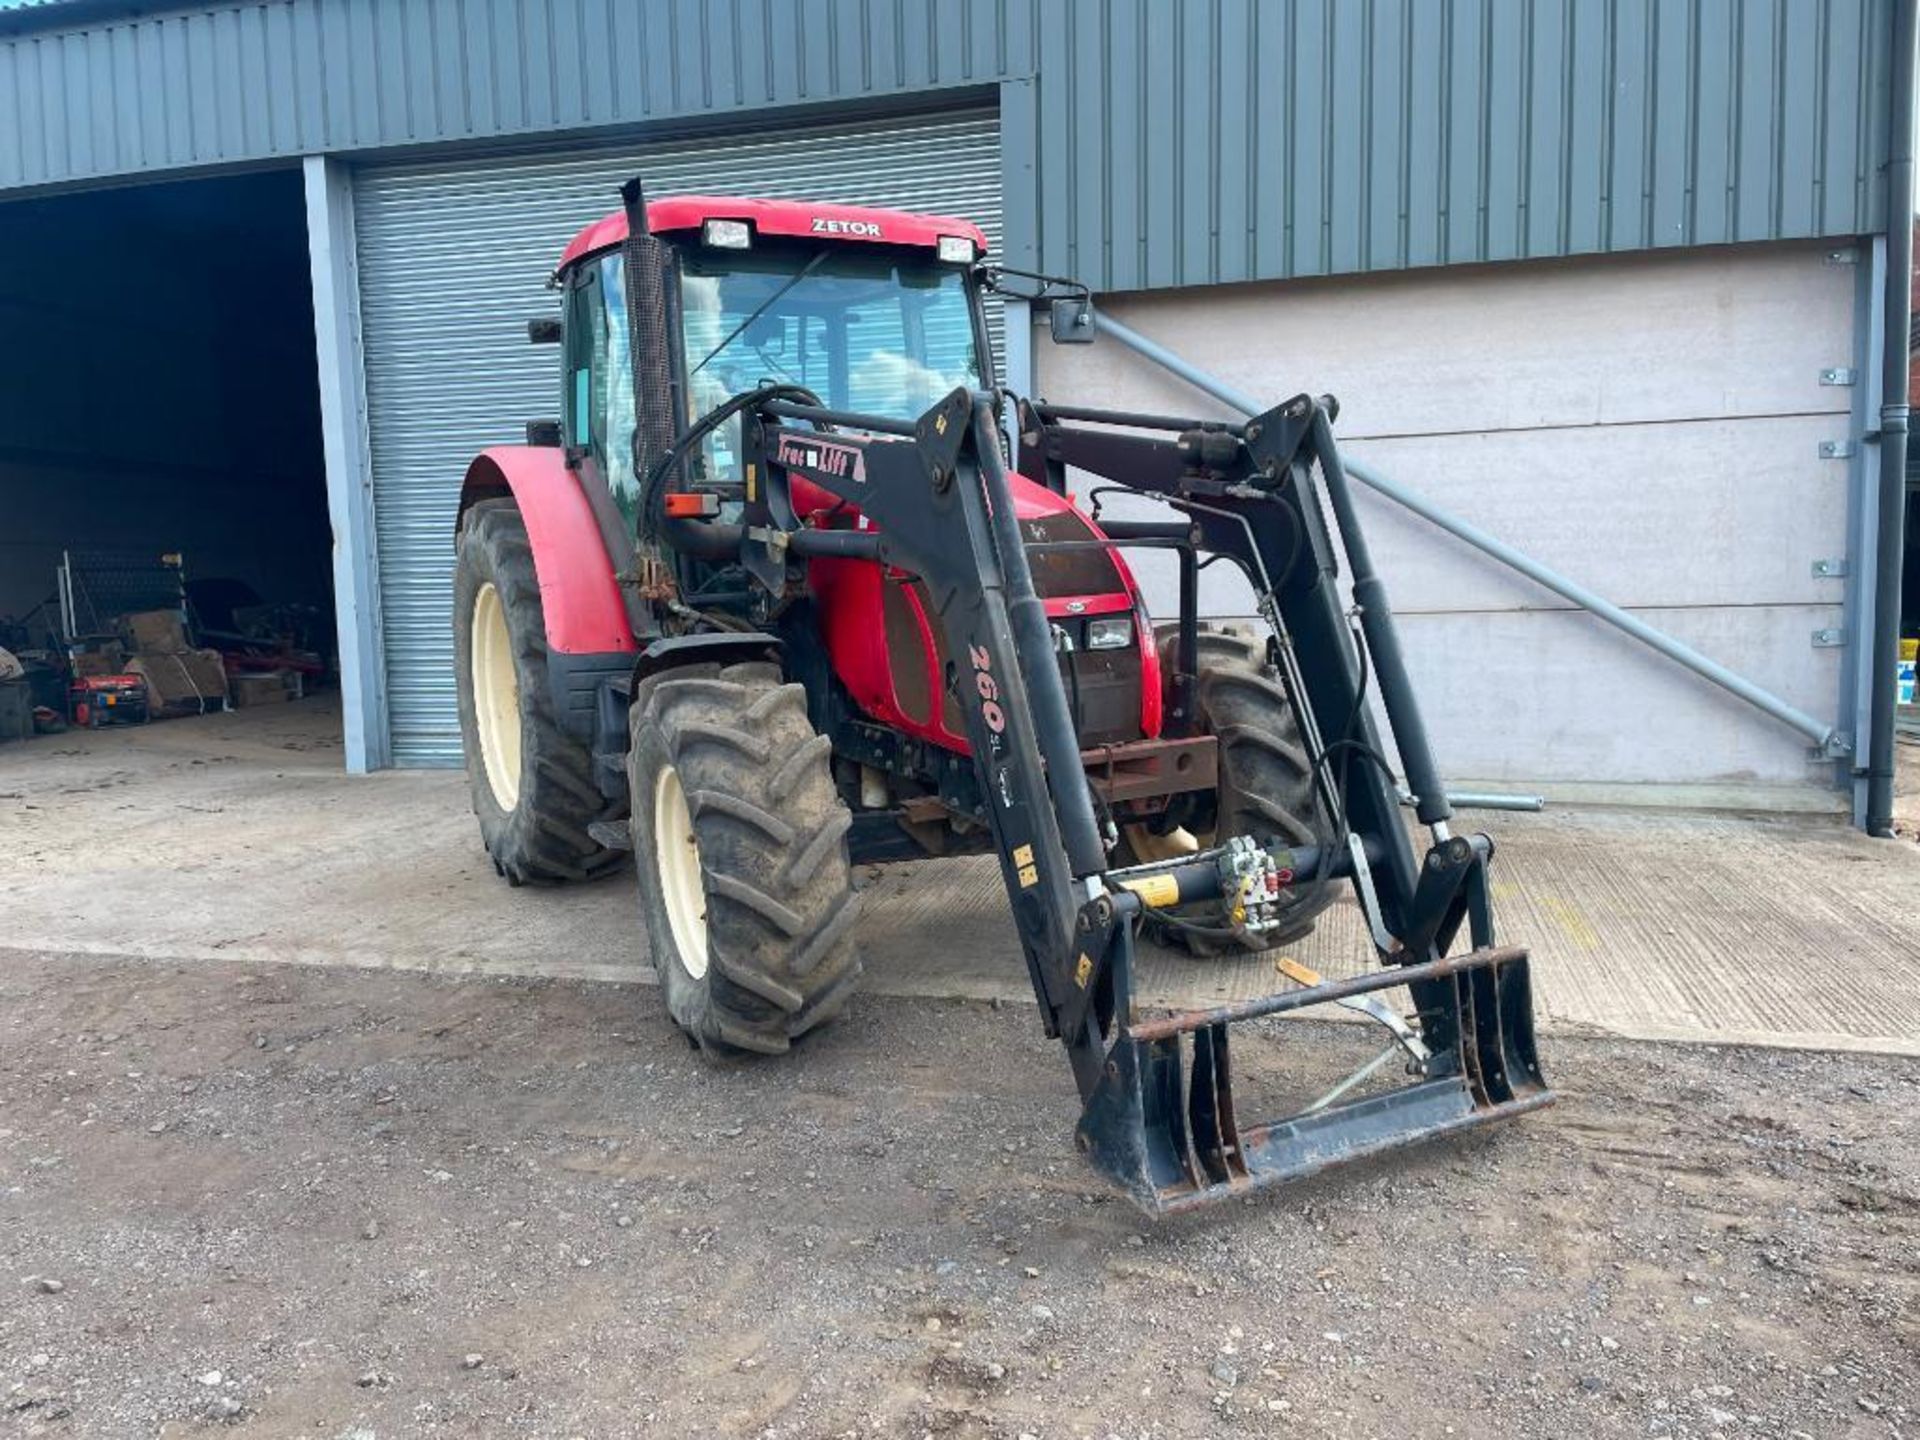 2007 Zetor 10641 4wd tractor with TracLift 260SL front loader, 3 manual spools on 420/70R24 front an - Image 6 of 20